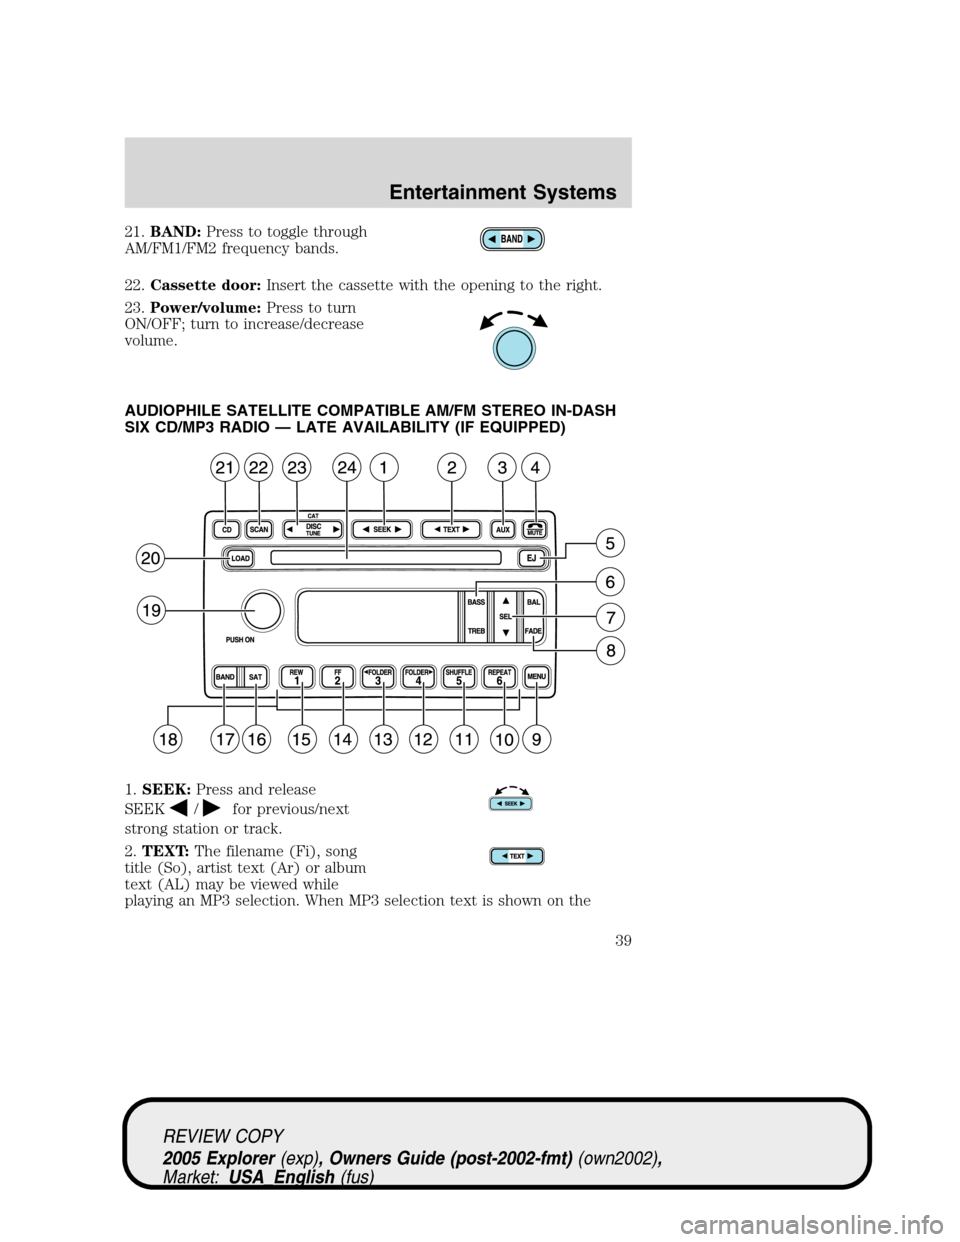 FORD EXPLORER 2005 3.G Owners Guide 21.BAND:Press to toggle through
AM/FM1/FM2 frequency bands.
22.Cassette door:Insert the cassette with the opening to the right.
23.Power/volume:Press to turn
ON/OFF; turn to increase/decrease
volume.
